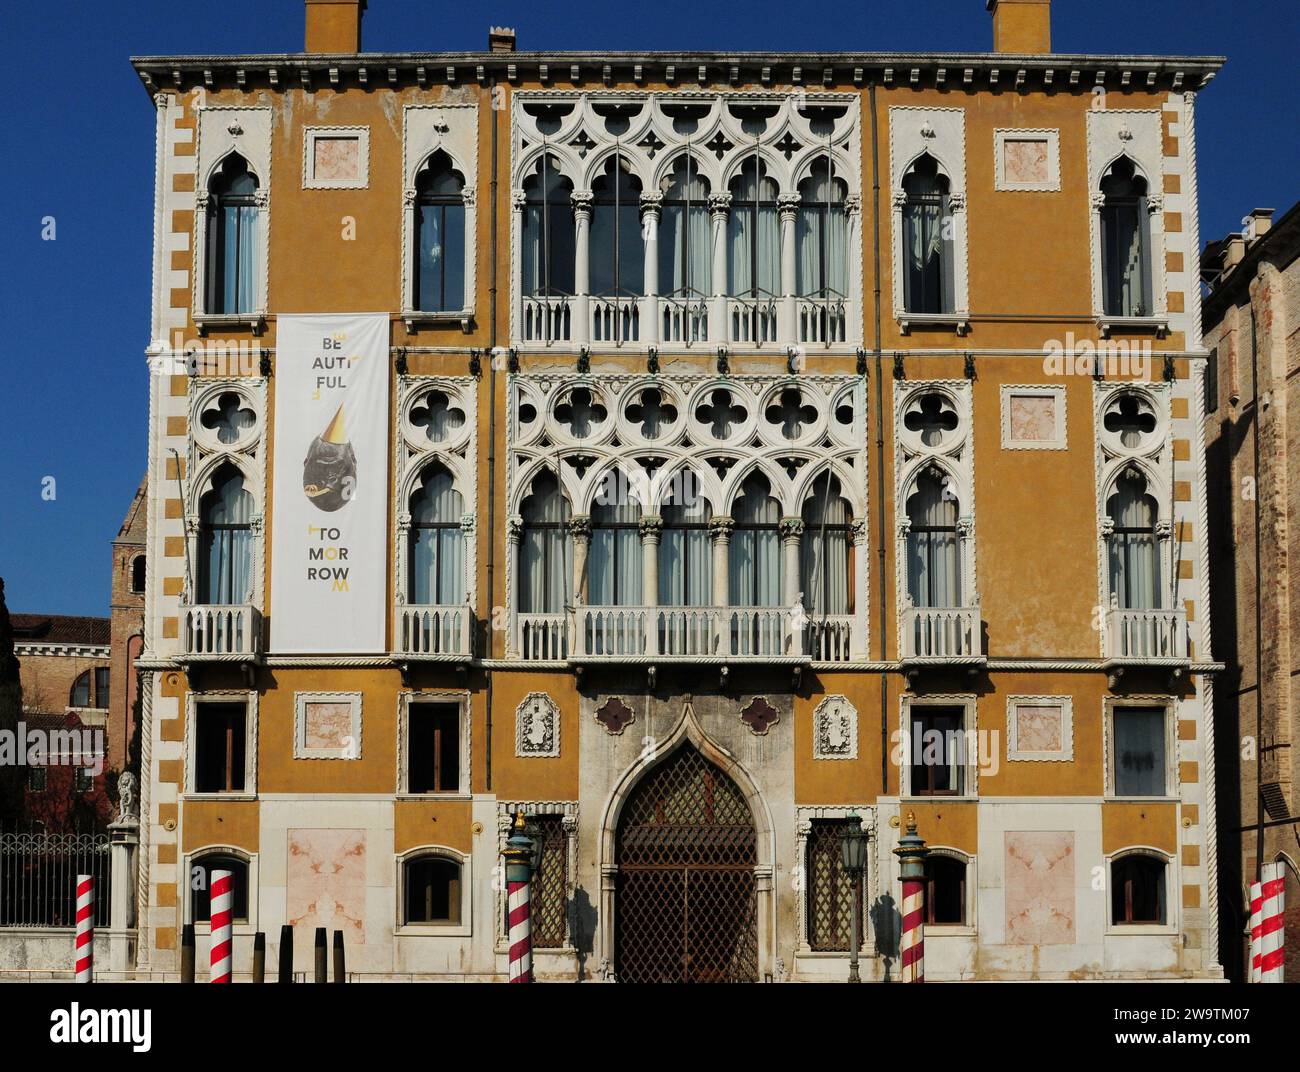 Facade Of The Venetian Renaissance Style Palazzo Franchetti On The Canale Grande In Venice Italy On A Wonderful Spring Day With A Clear Blue Sky Stock Photo